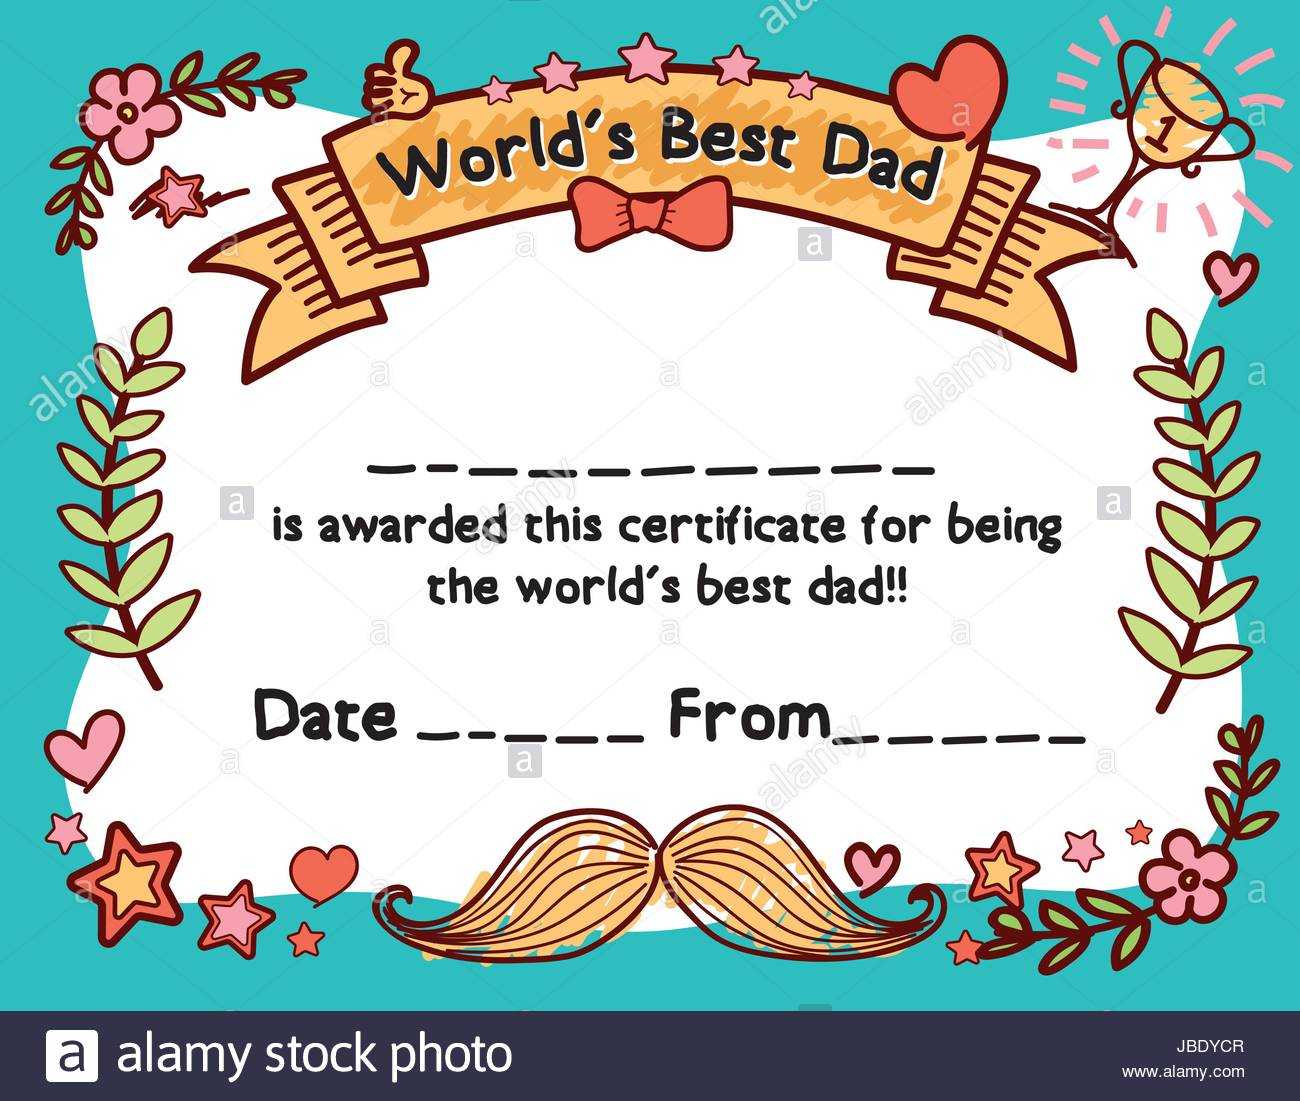 World's Best Dad Award Certificate Template For Father's Day With Regard To Player Of The Day Certificate Template